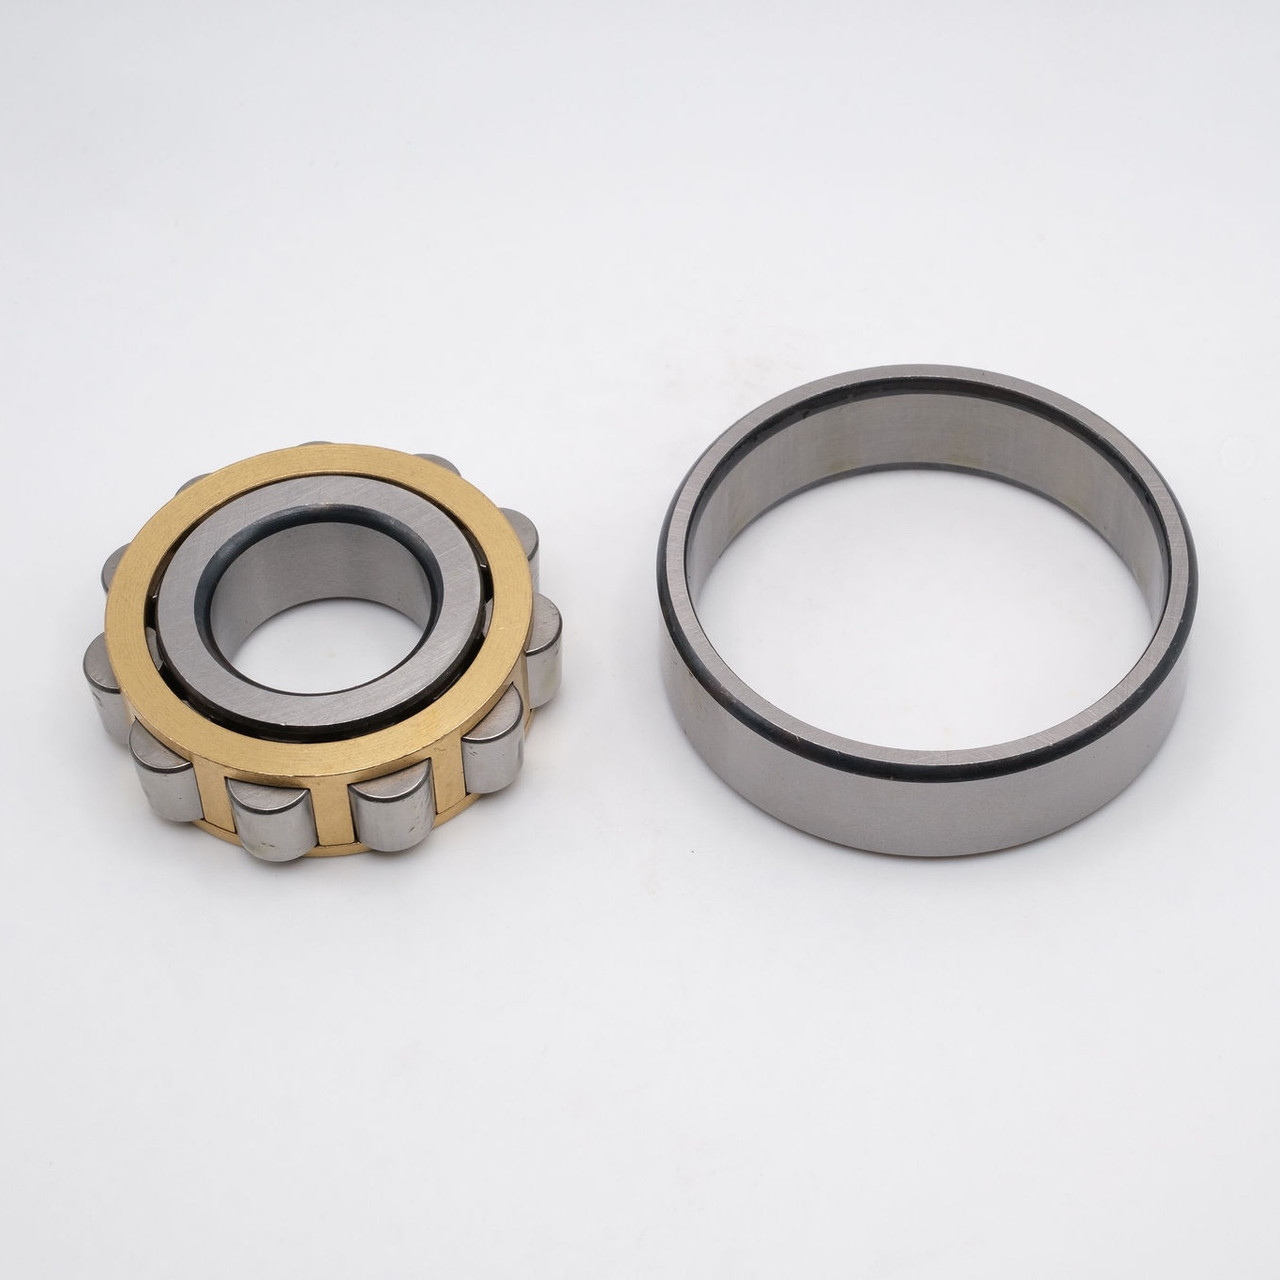 NU206EM Cylindrical Roller Bearing Brass Cage 30x62x16 Separated View